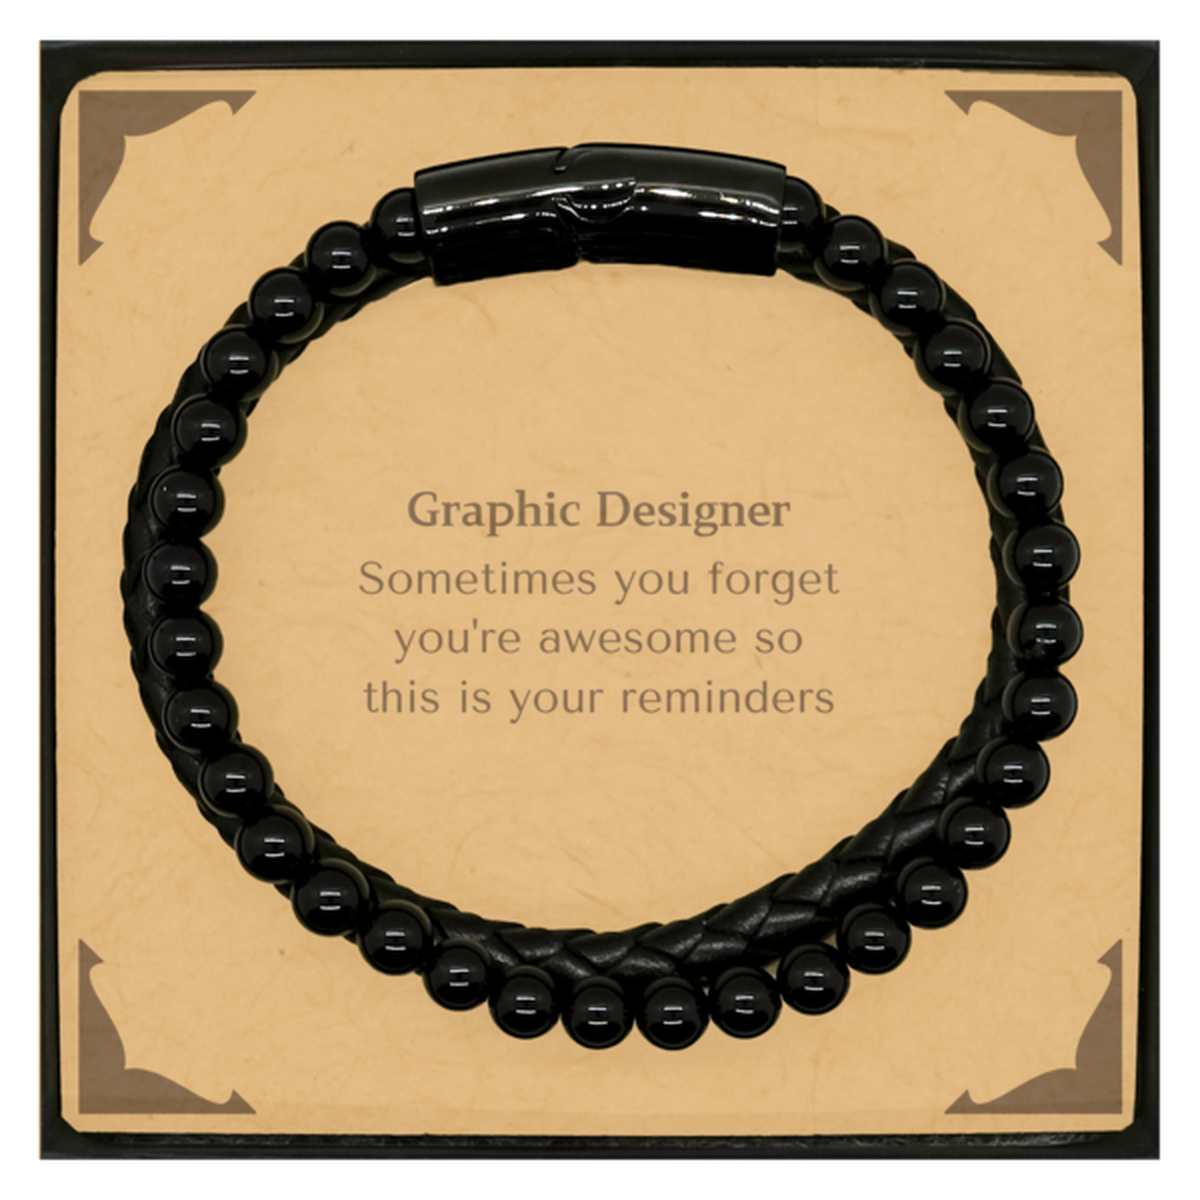 Sentimental Graphic Designer Stone Leather Bracelets, Graphic Designer Sometimes you forget you're awesome so this is your reminders, Graduation Christmas Birthday Gifts for Graphic Designer, Men, Women, Coworkers